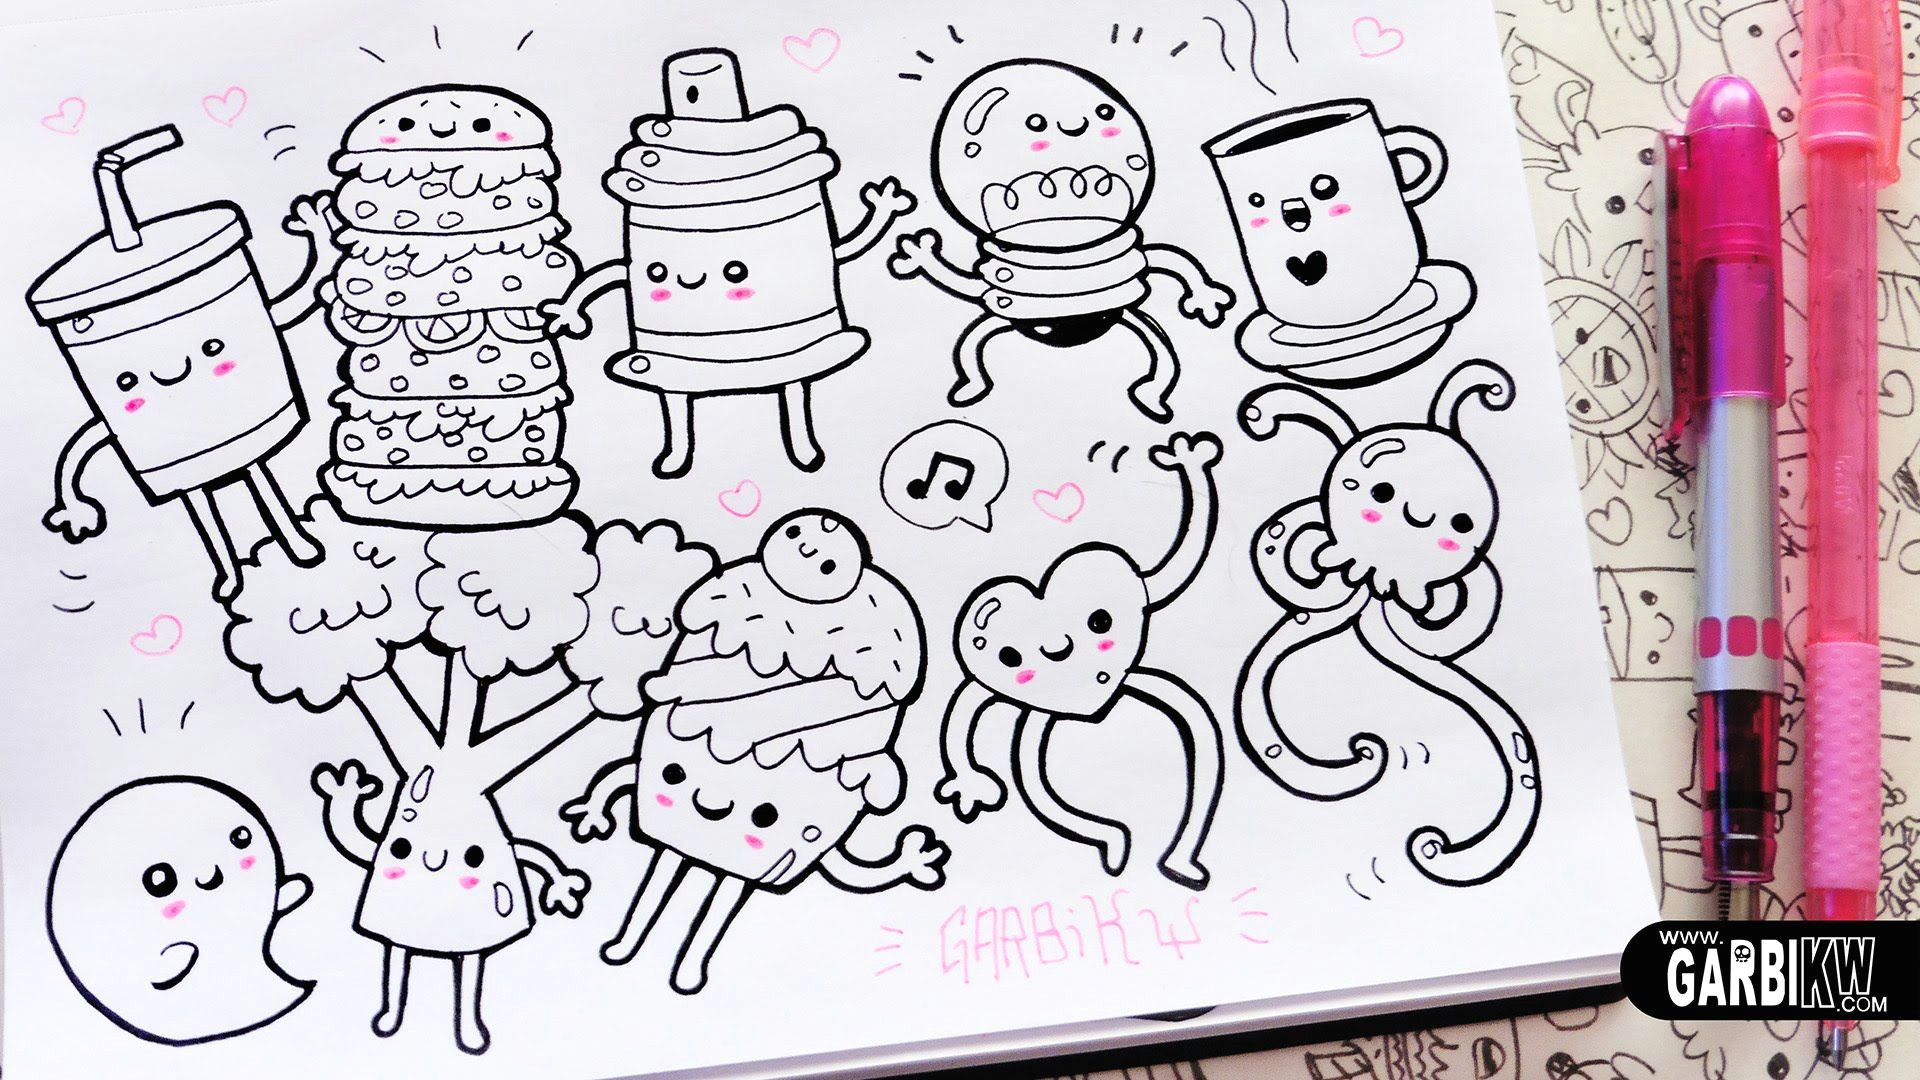 10 little drawings for your doodles easy and kawaii drawings by garbi kw